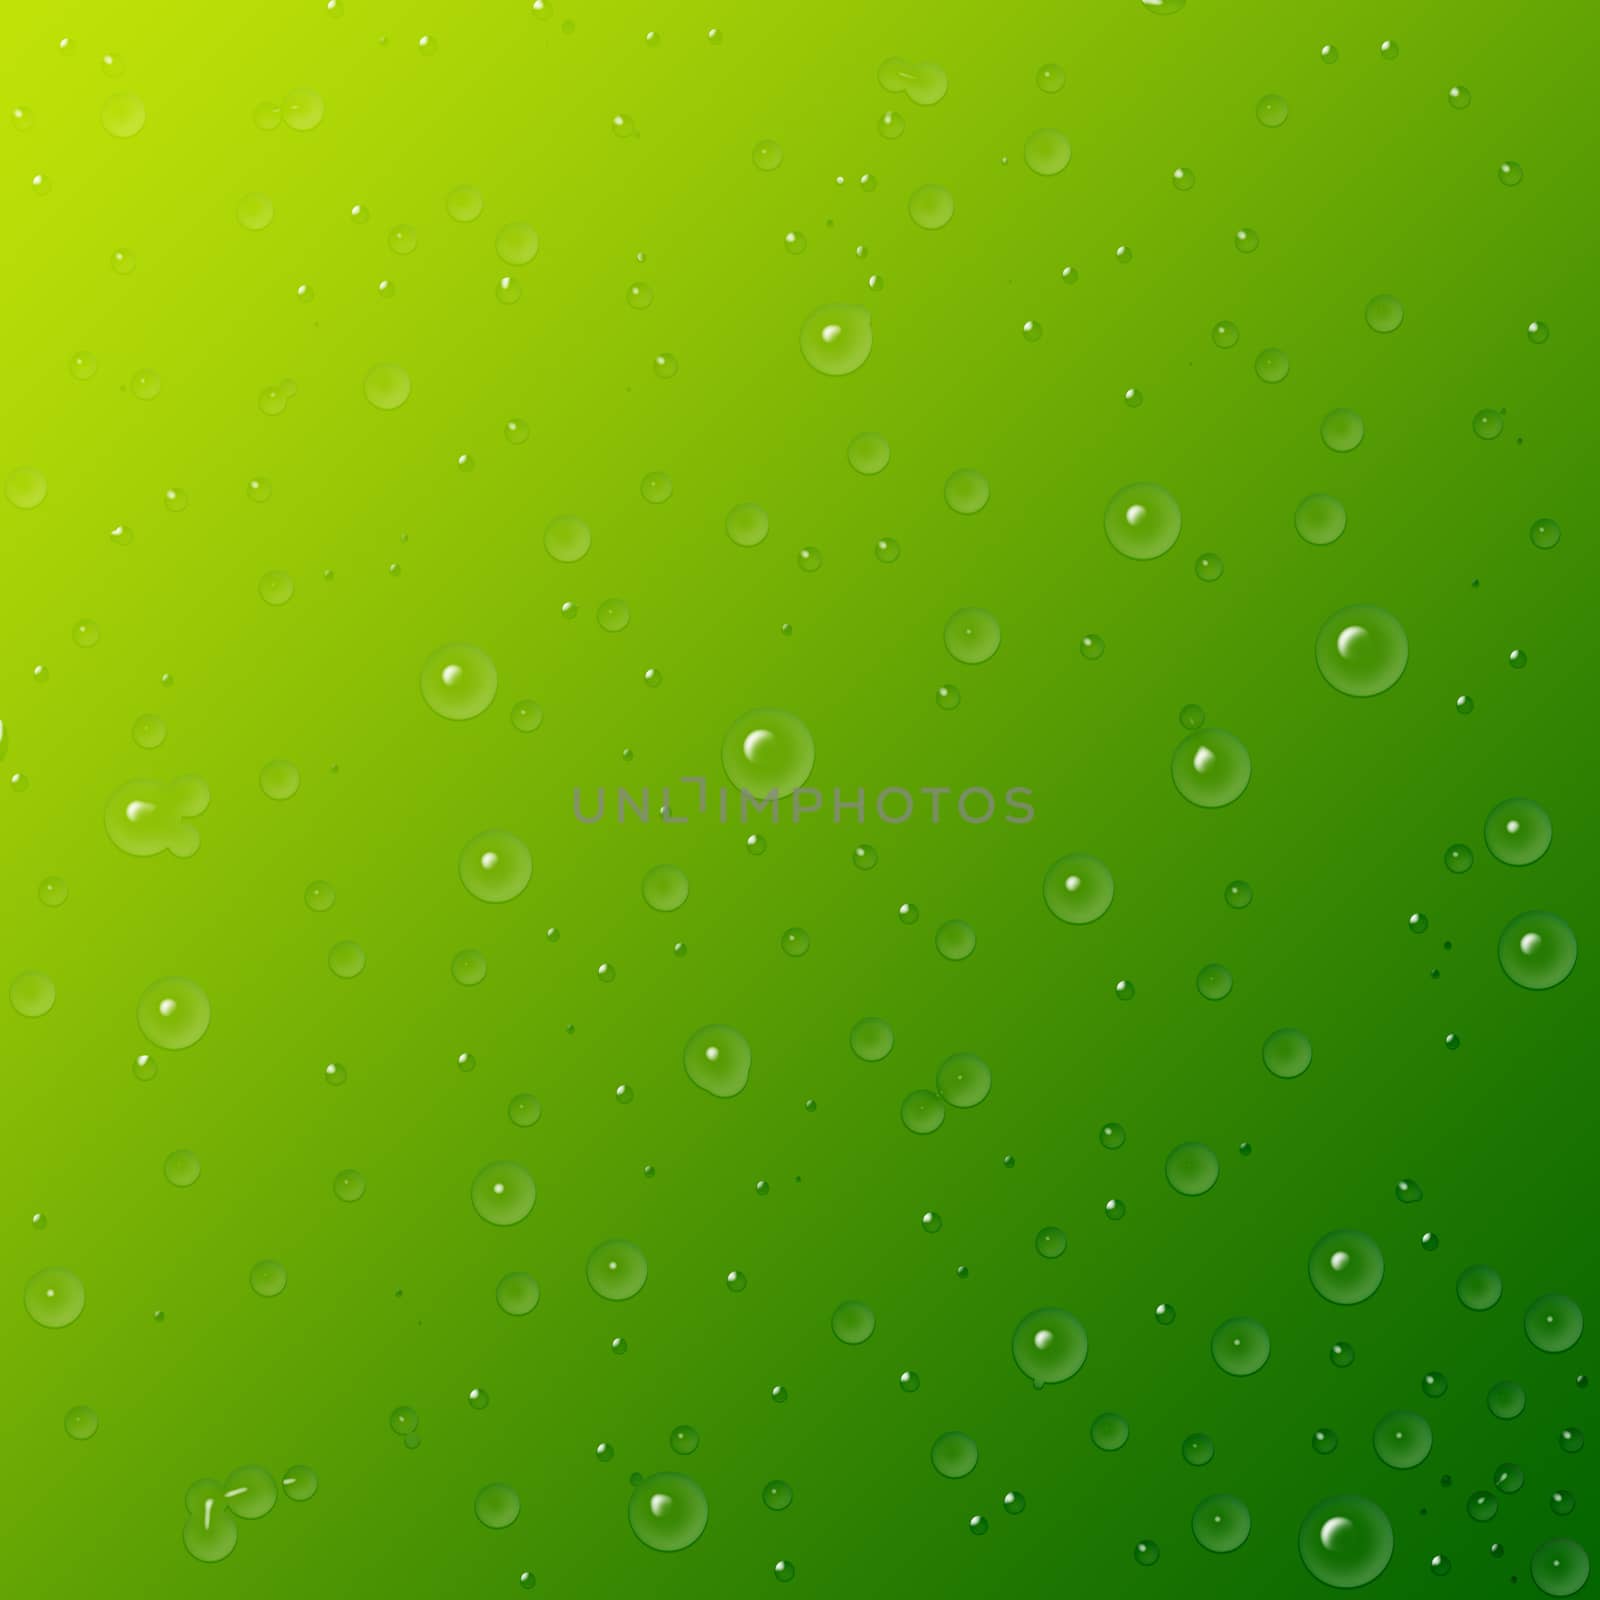 water droplets on green background